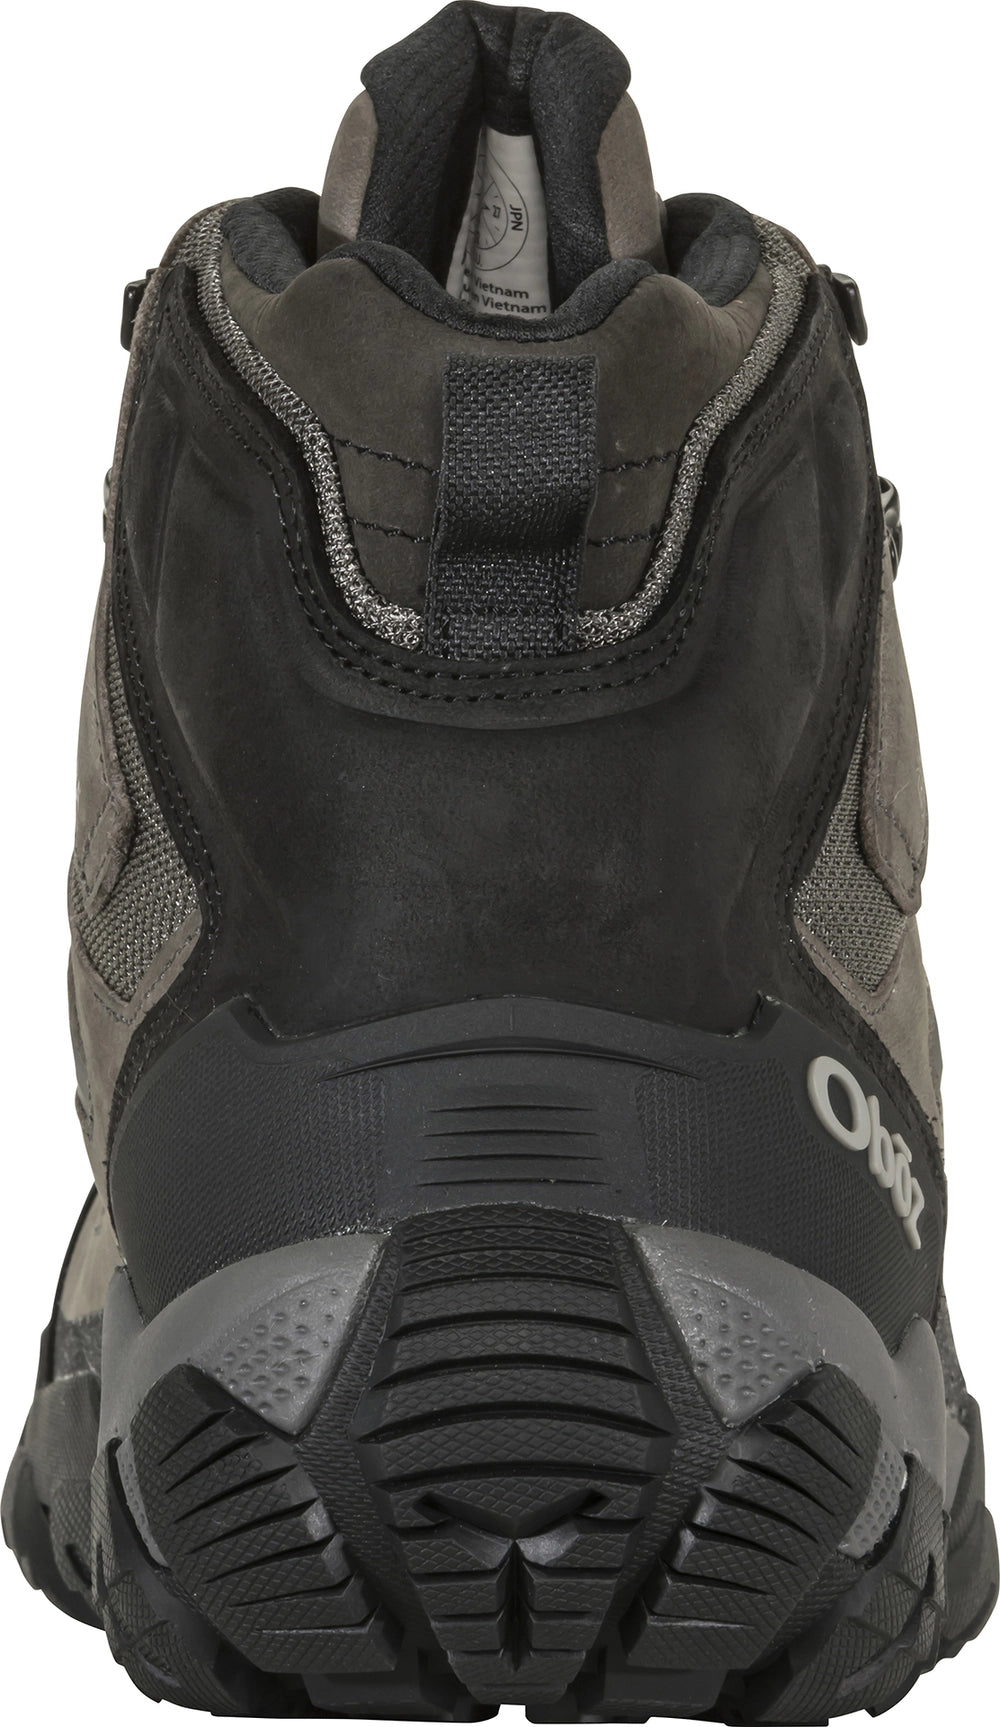 Men's Oboz Sawtooth X Mid Waterproof Color: Charcoal